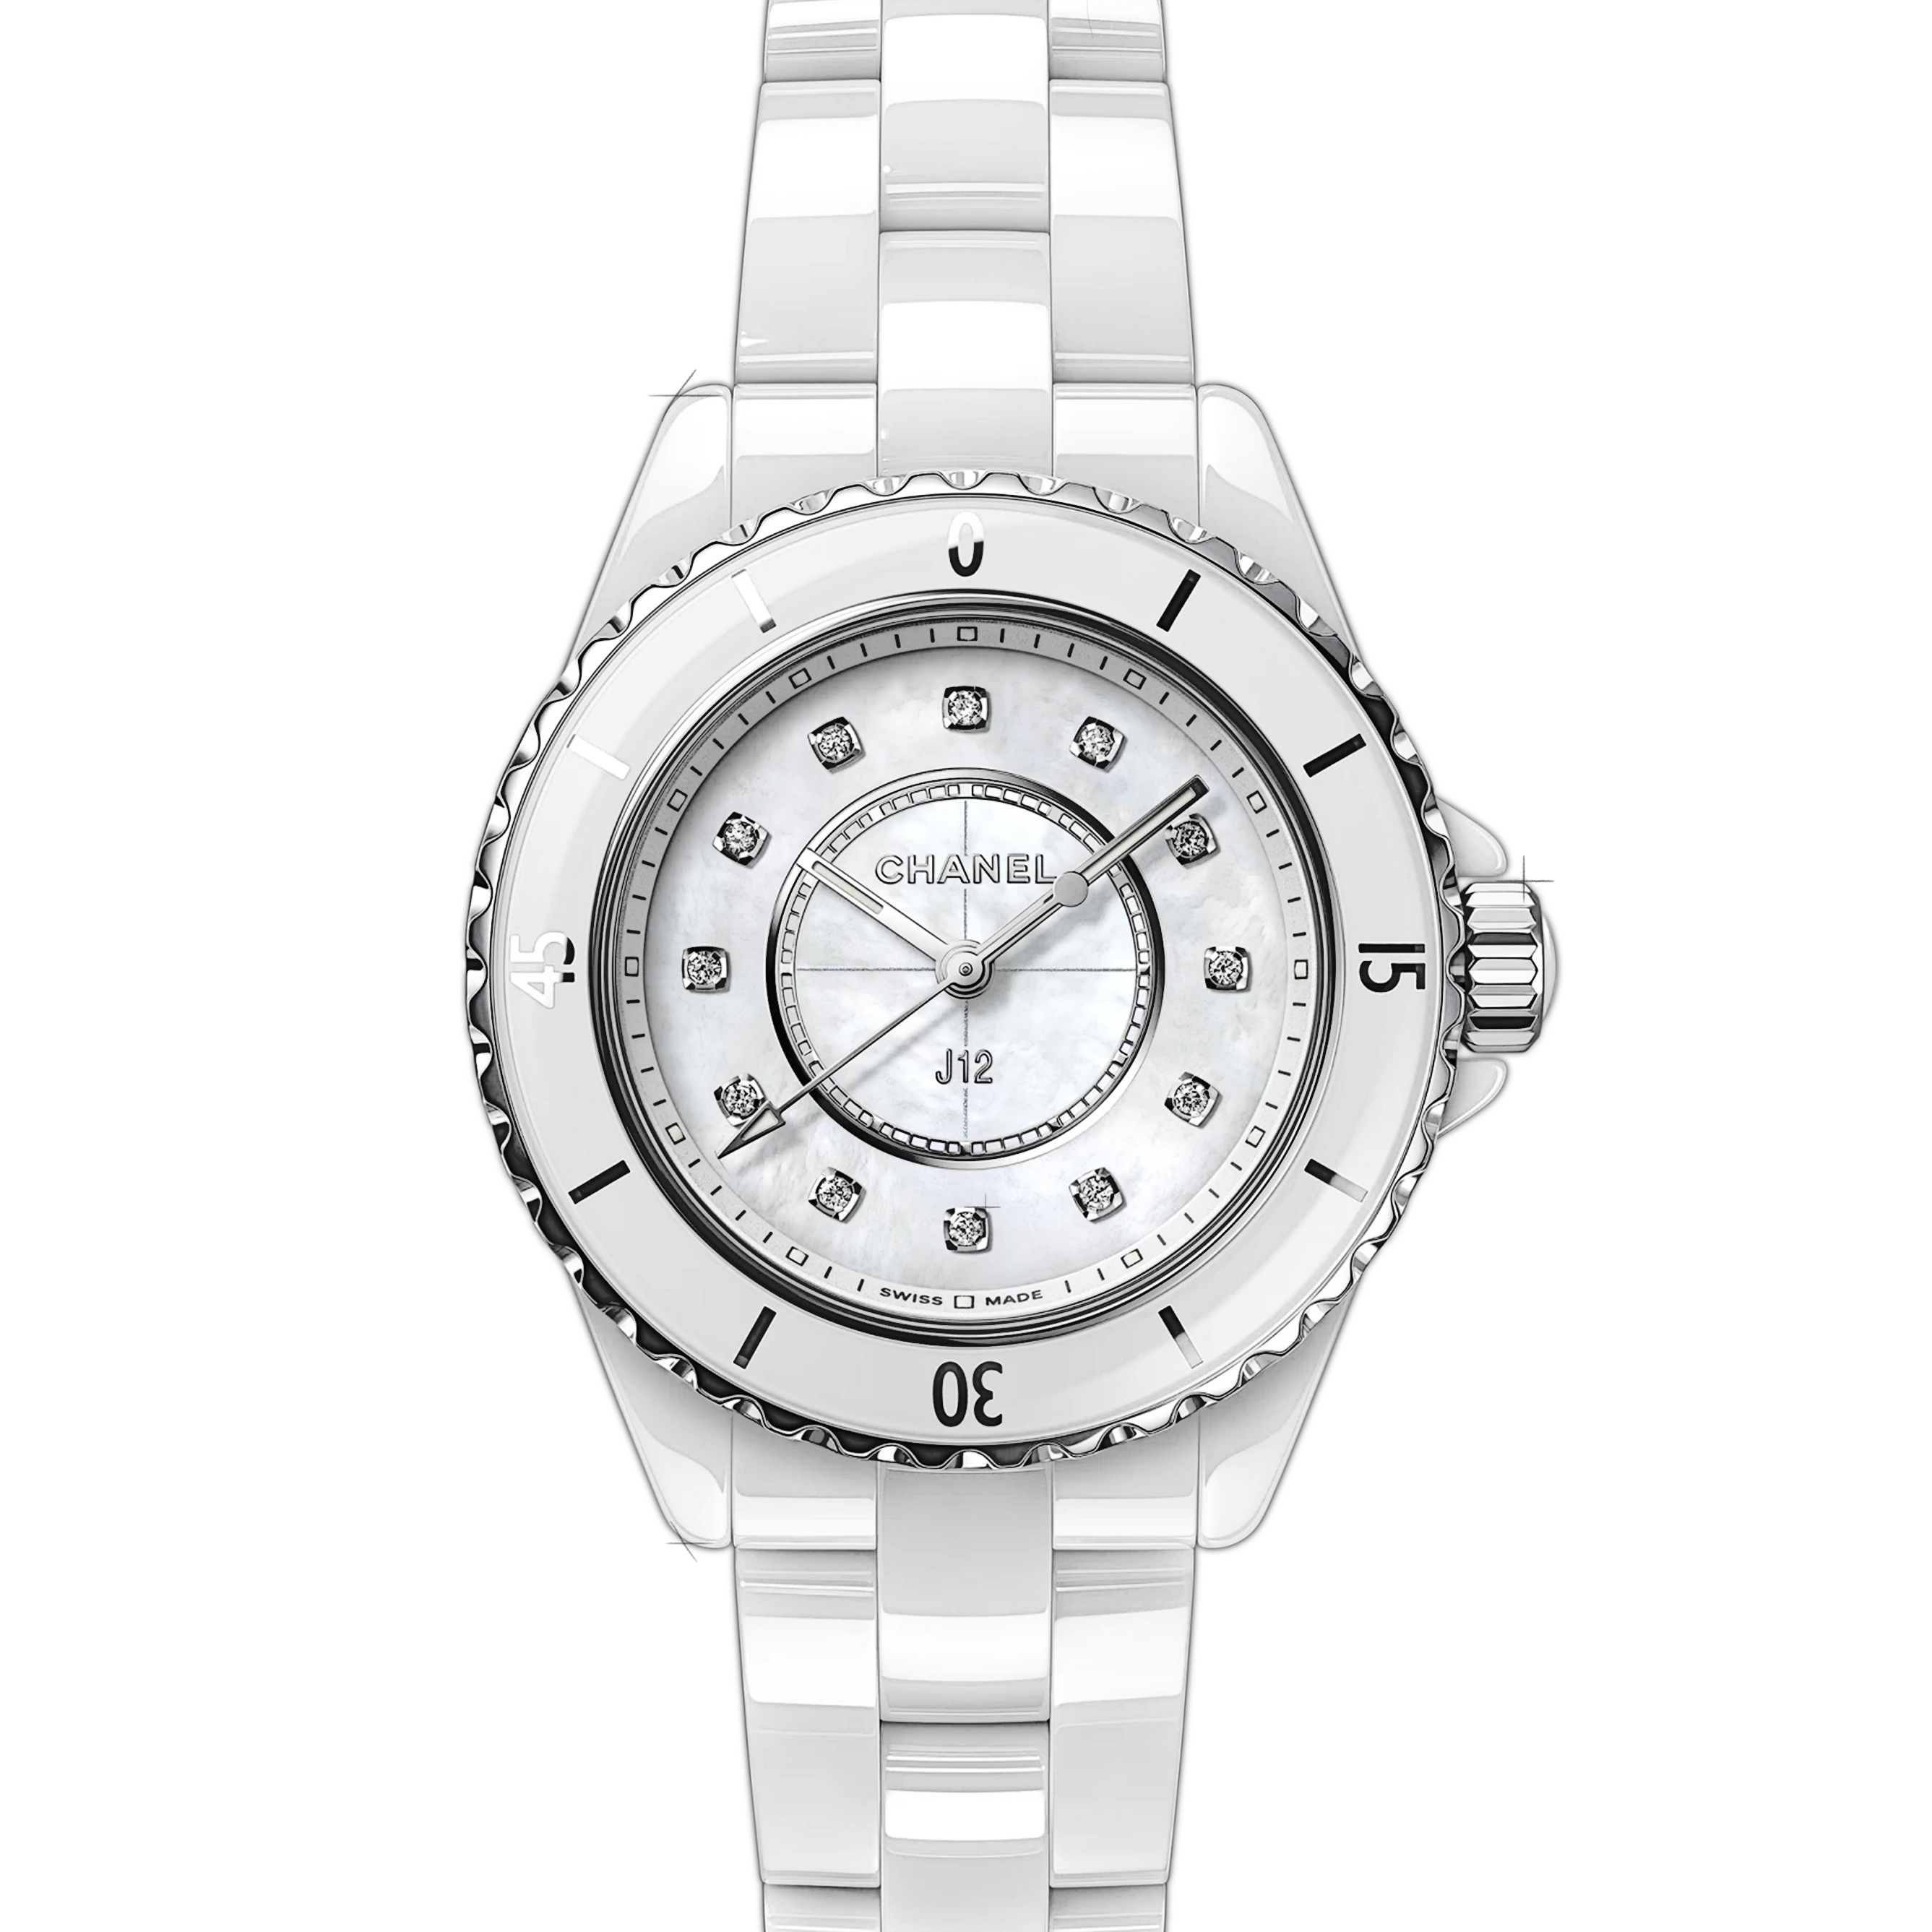  Chanel J12 Moon Phase Mother of Pearl Dial White Ceramic Mens  Watch H3404 : Clothing, Shoes & Jewelry